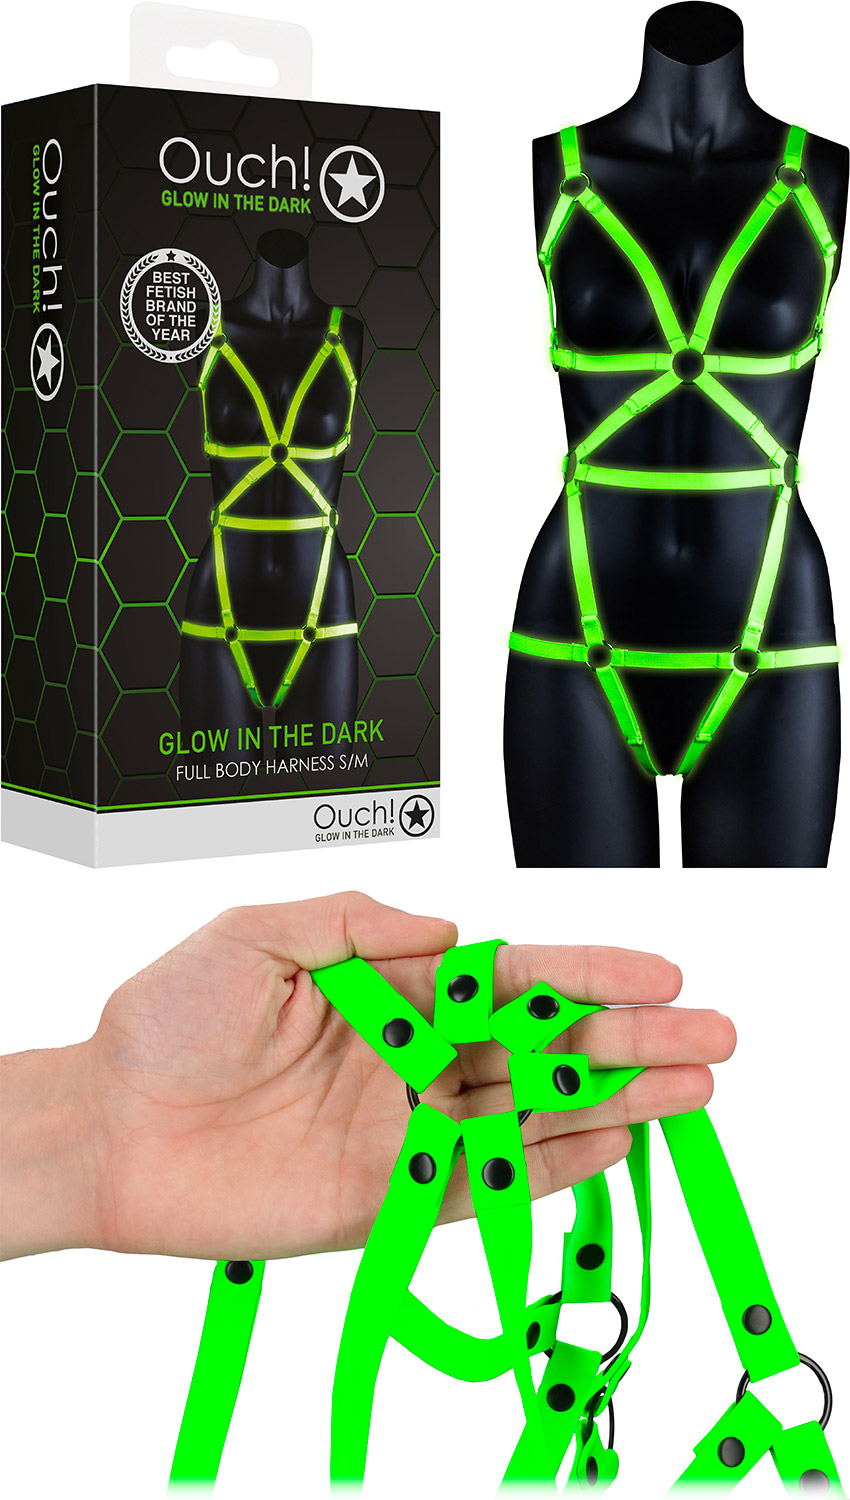 Ouch! glow-in-the-dark harness - Green (S/M)